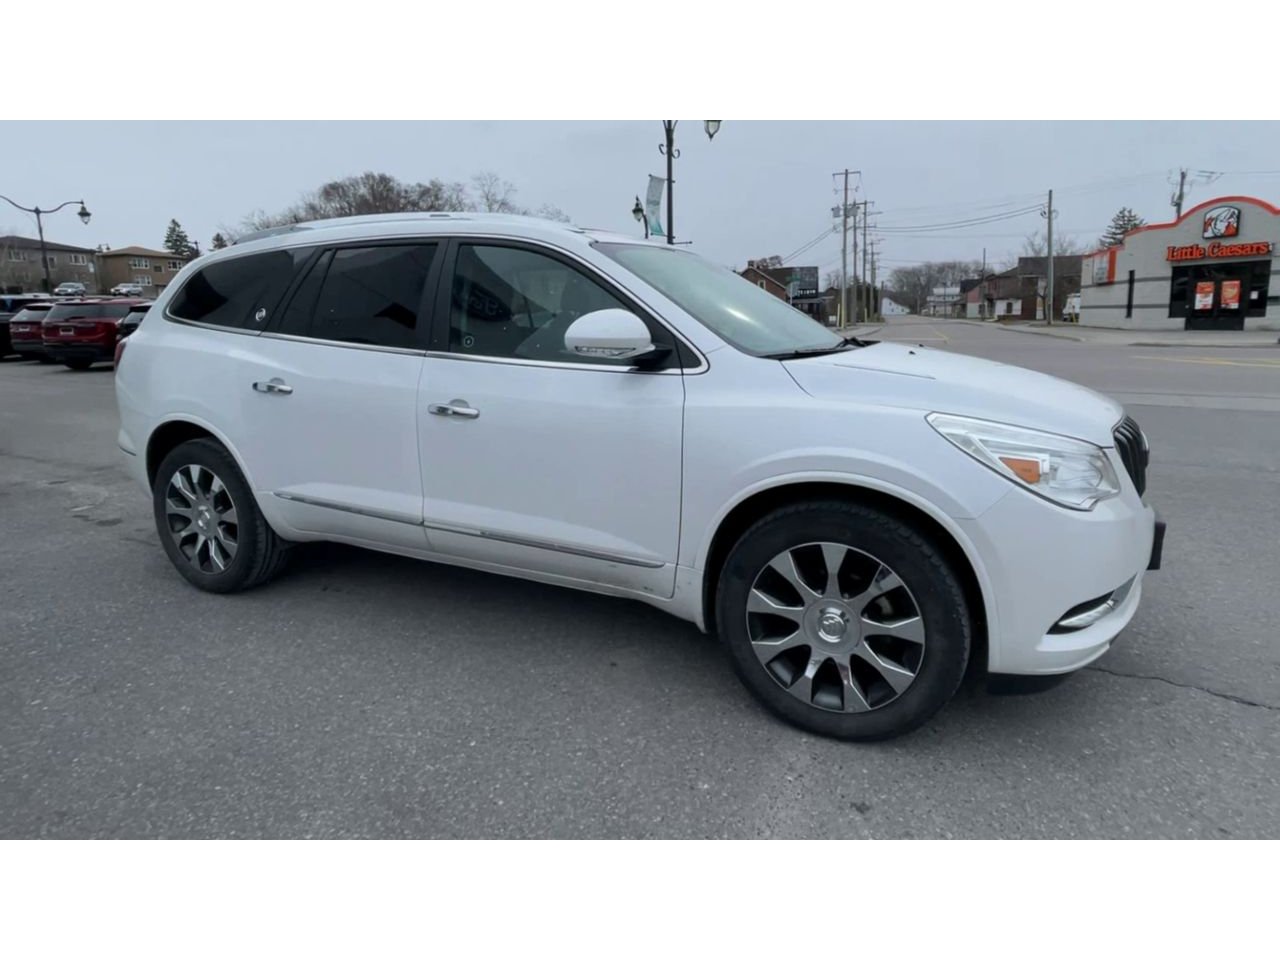 2017 Buick Enclave - P21810 Full Image 2